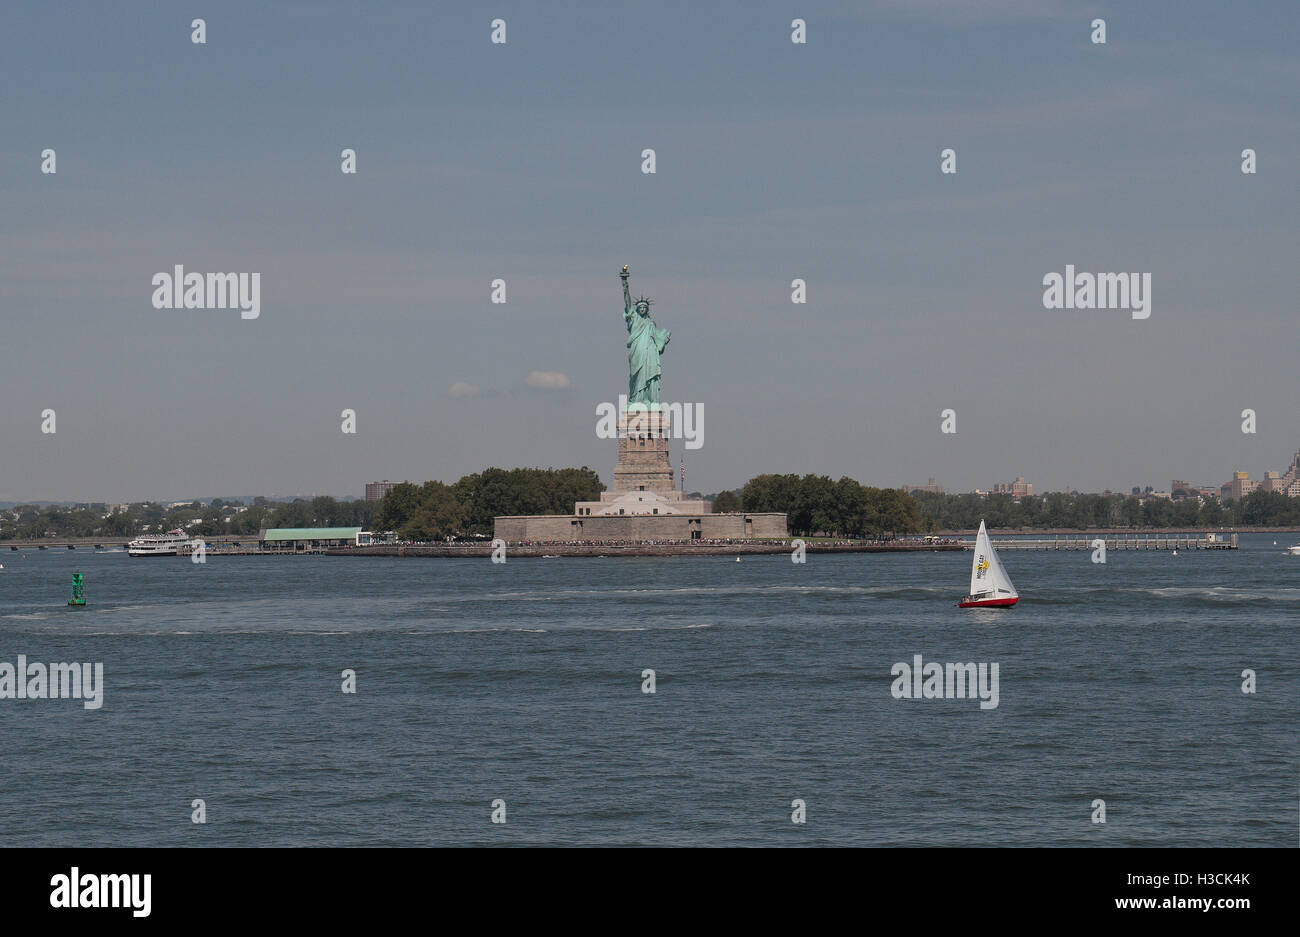 The Statue of Liberty in Upper New York Bay as viewed from a Staten Island ferry, New York, United States. Stock Photo